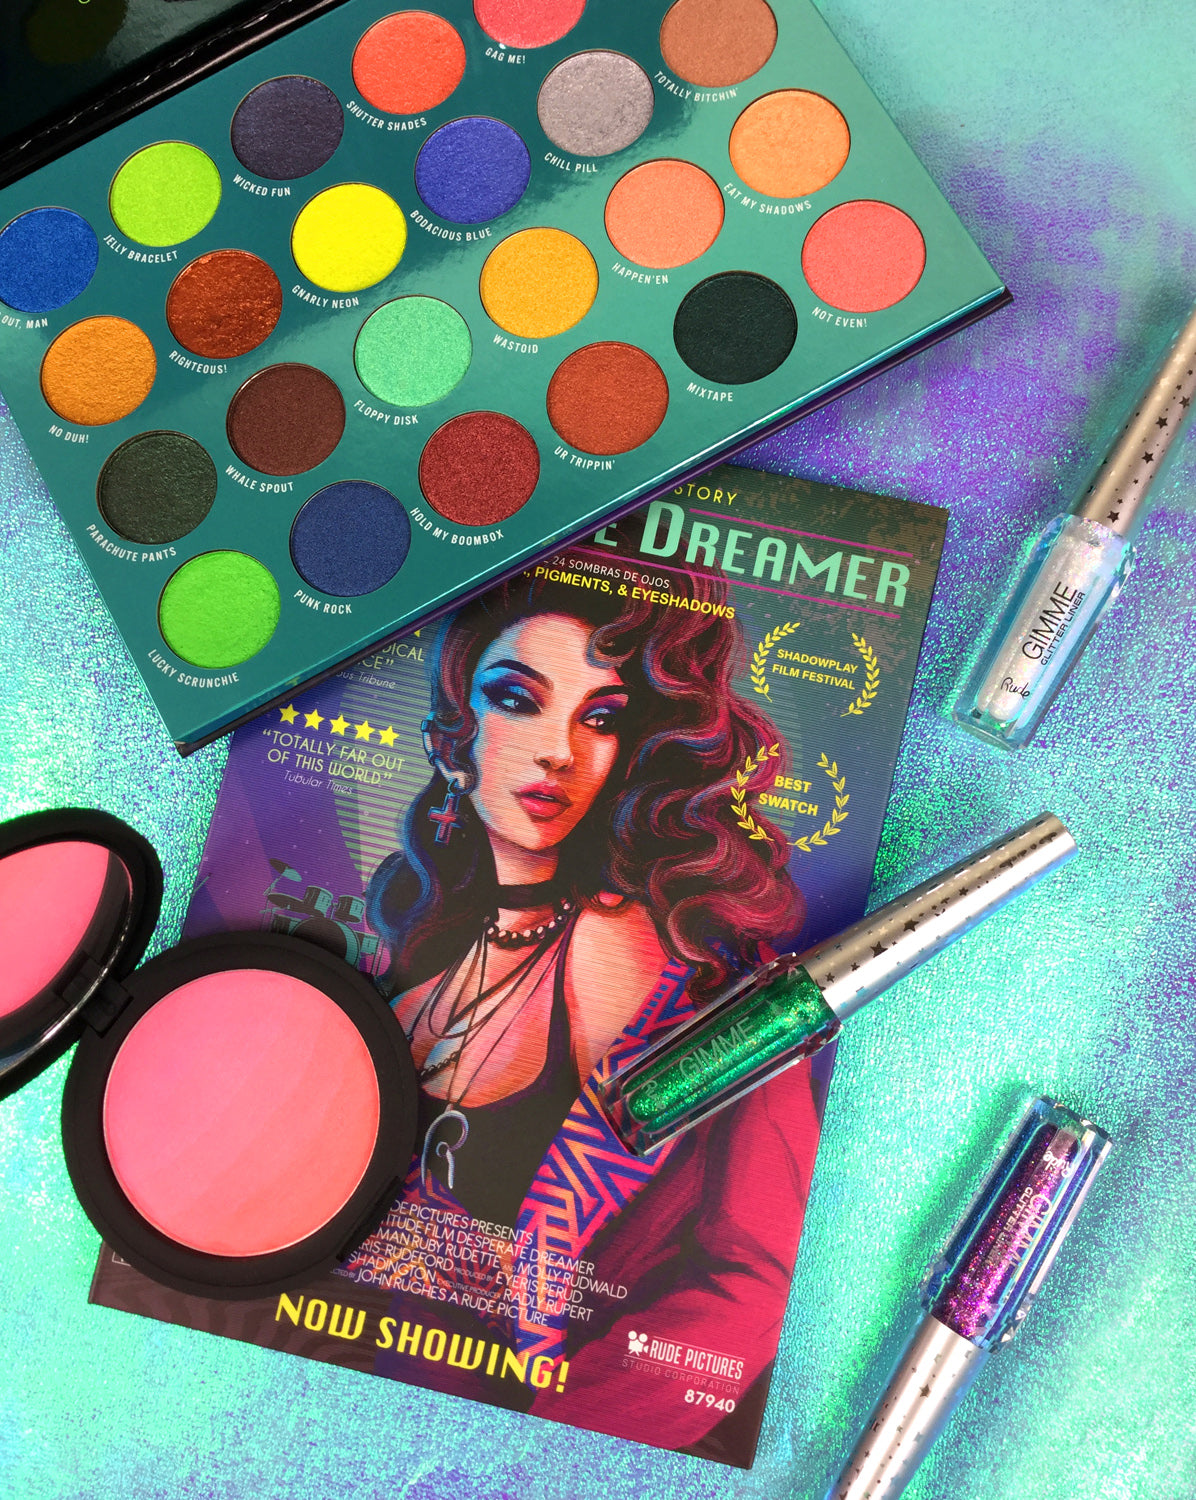 Desperate Dreamer 80's Eyeshadow Palette with other products